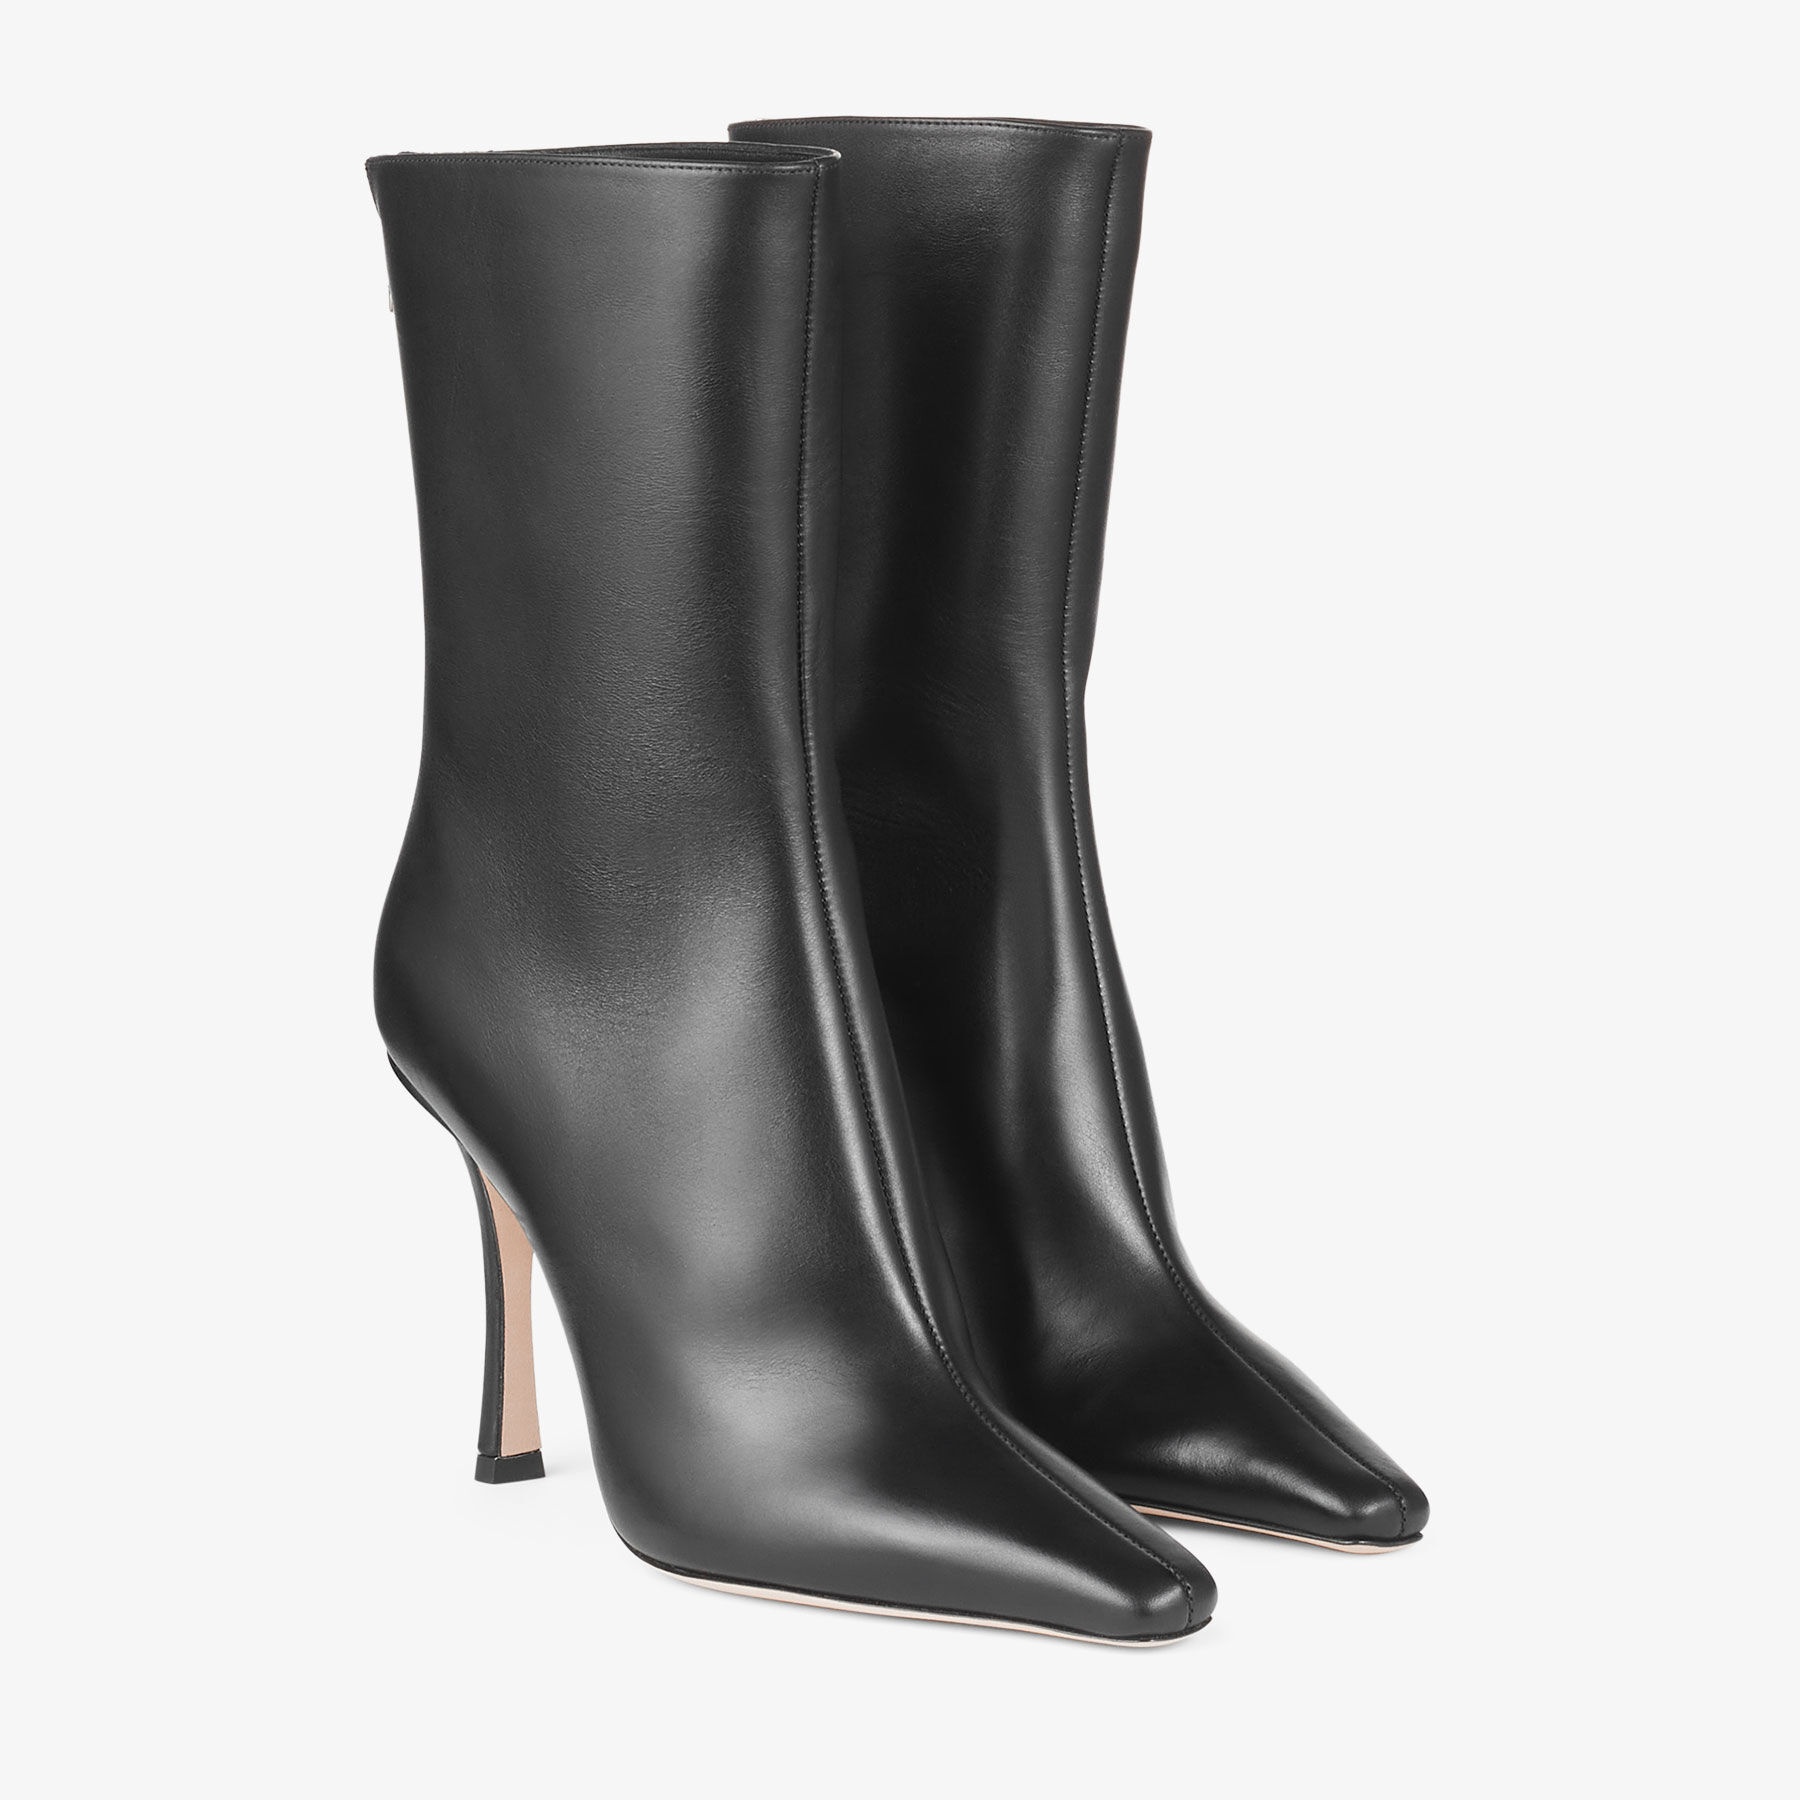 Agathe Ankle Boot 100
Black Calf Leather Ankle Boots - 4